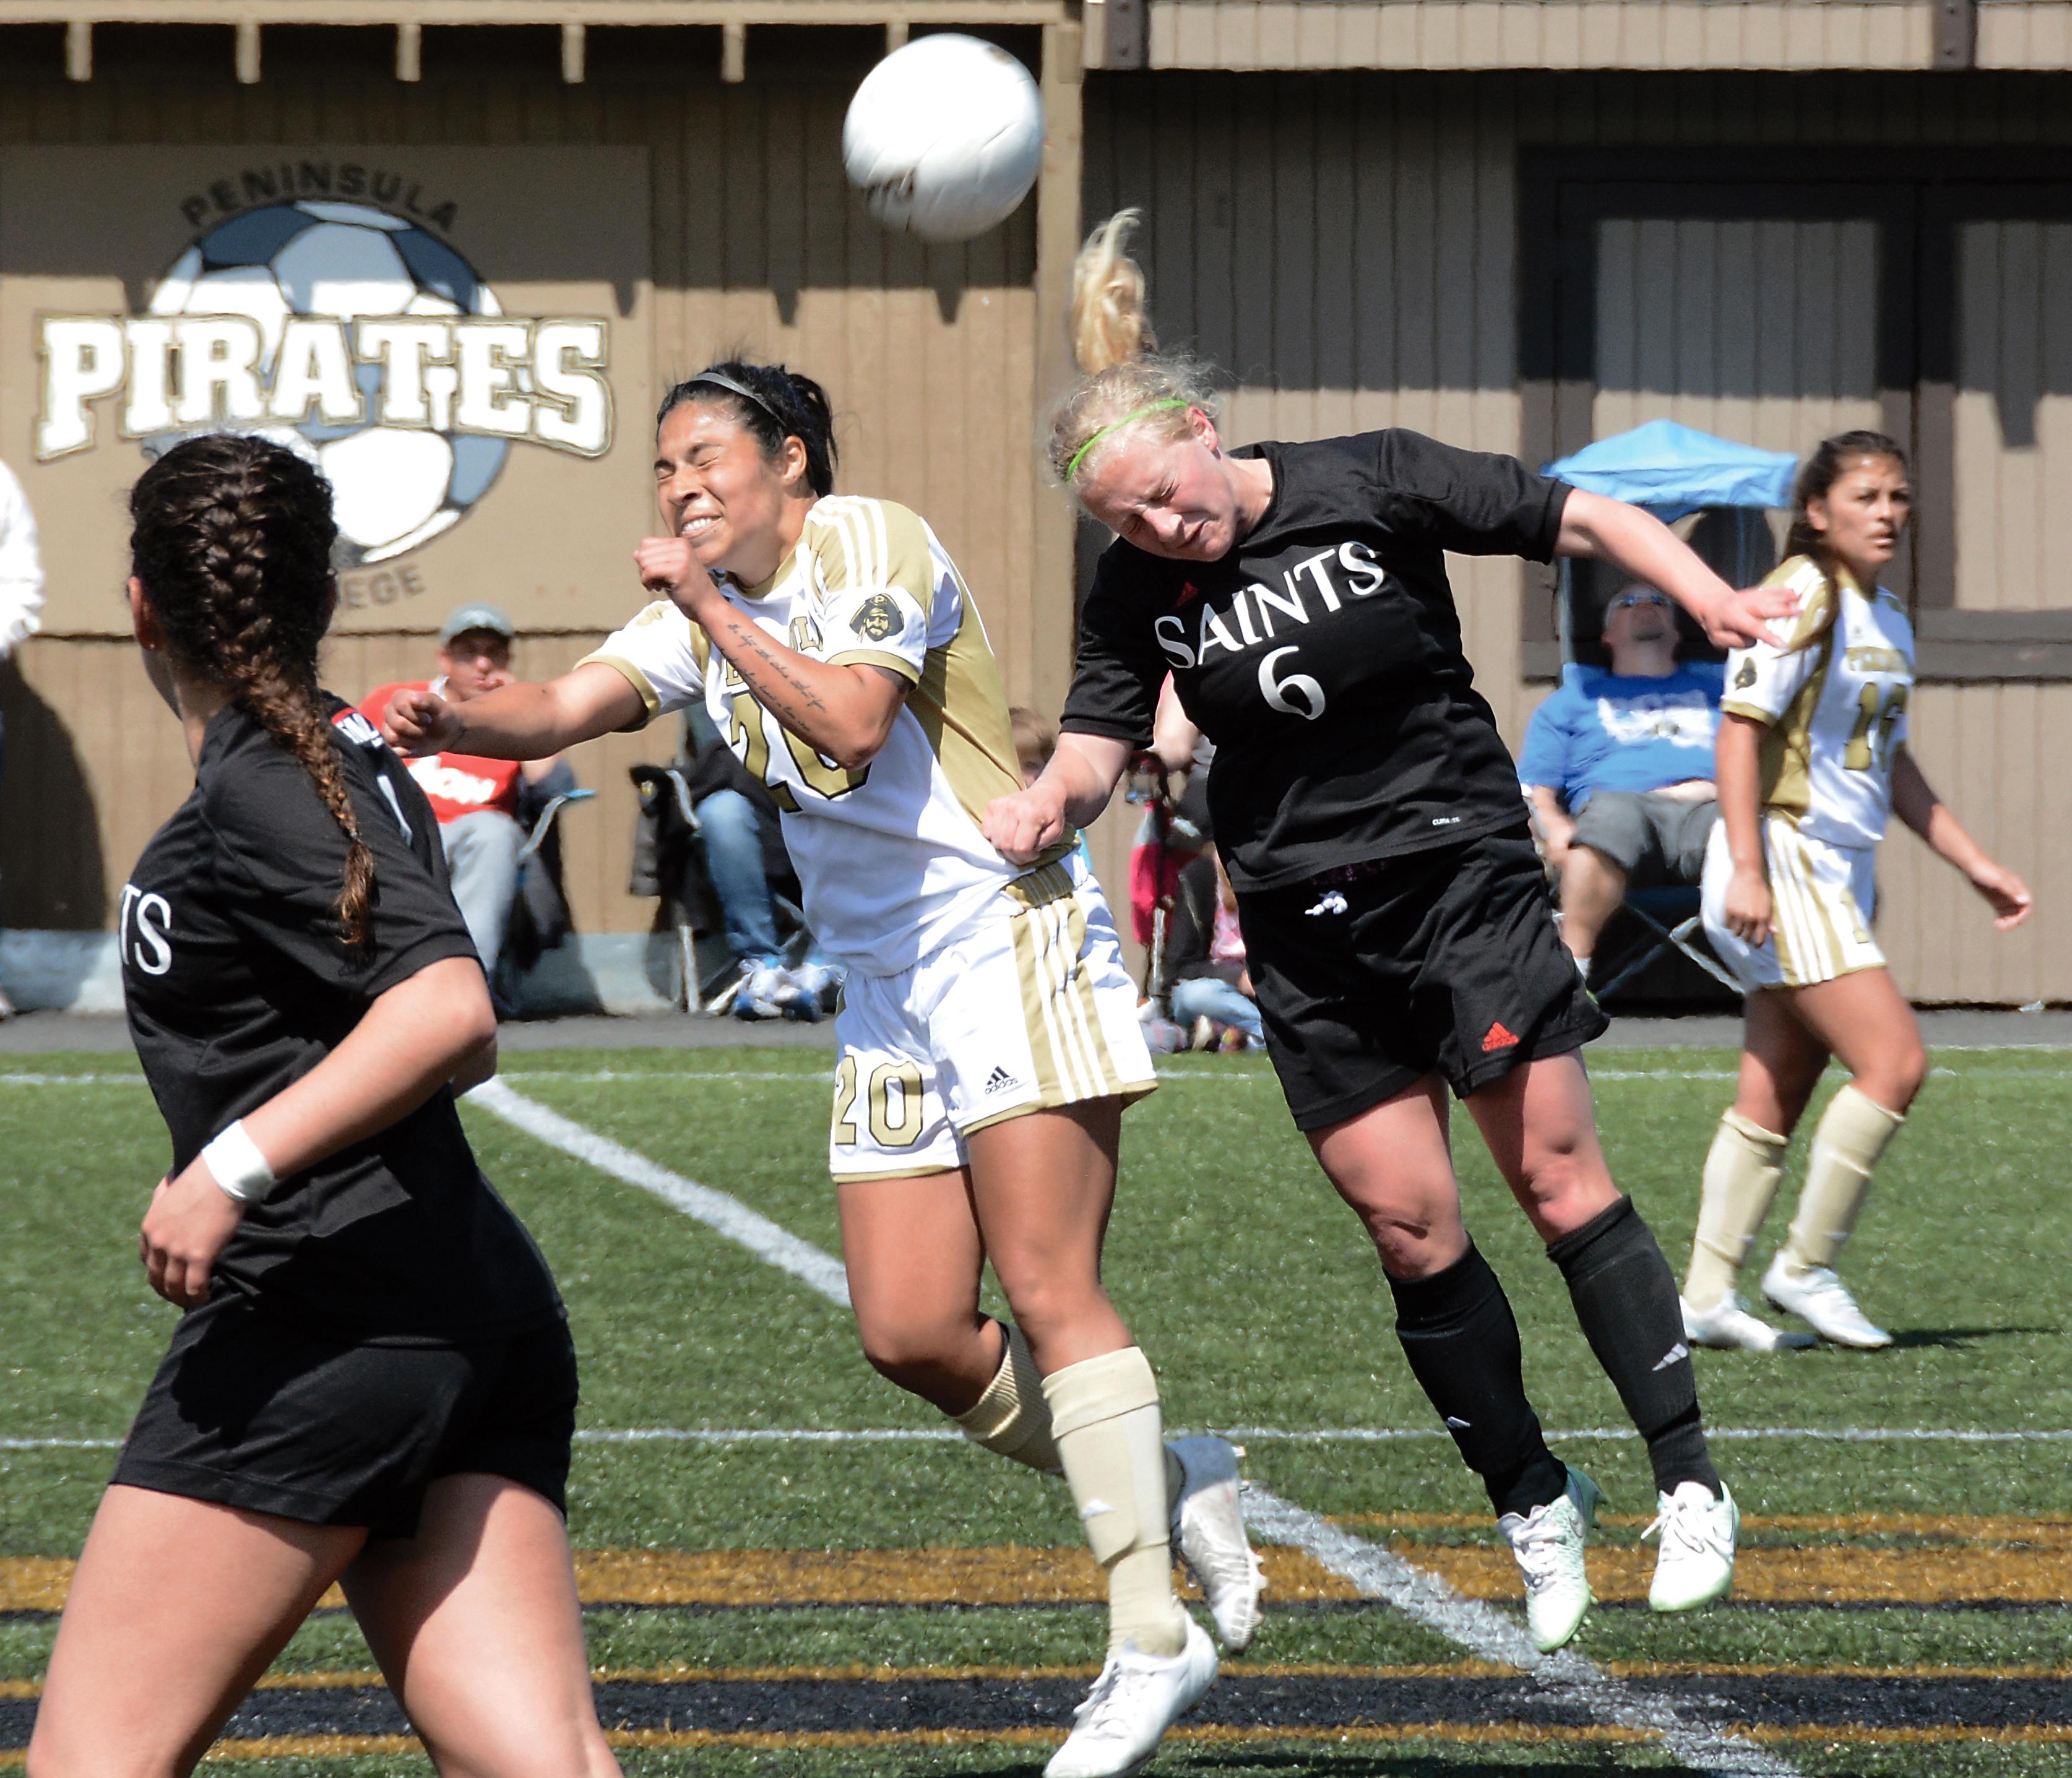 COLLEGE SOCCER: Peninsula Pirates raise $5,000 at Rumble in the